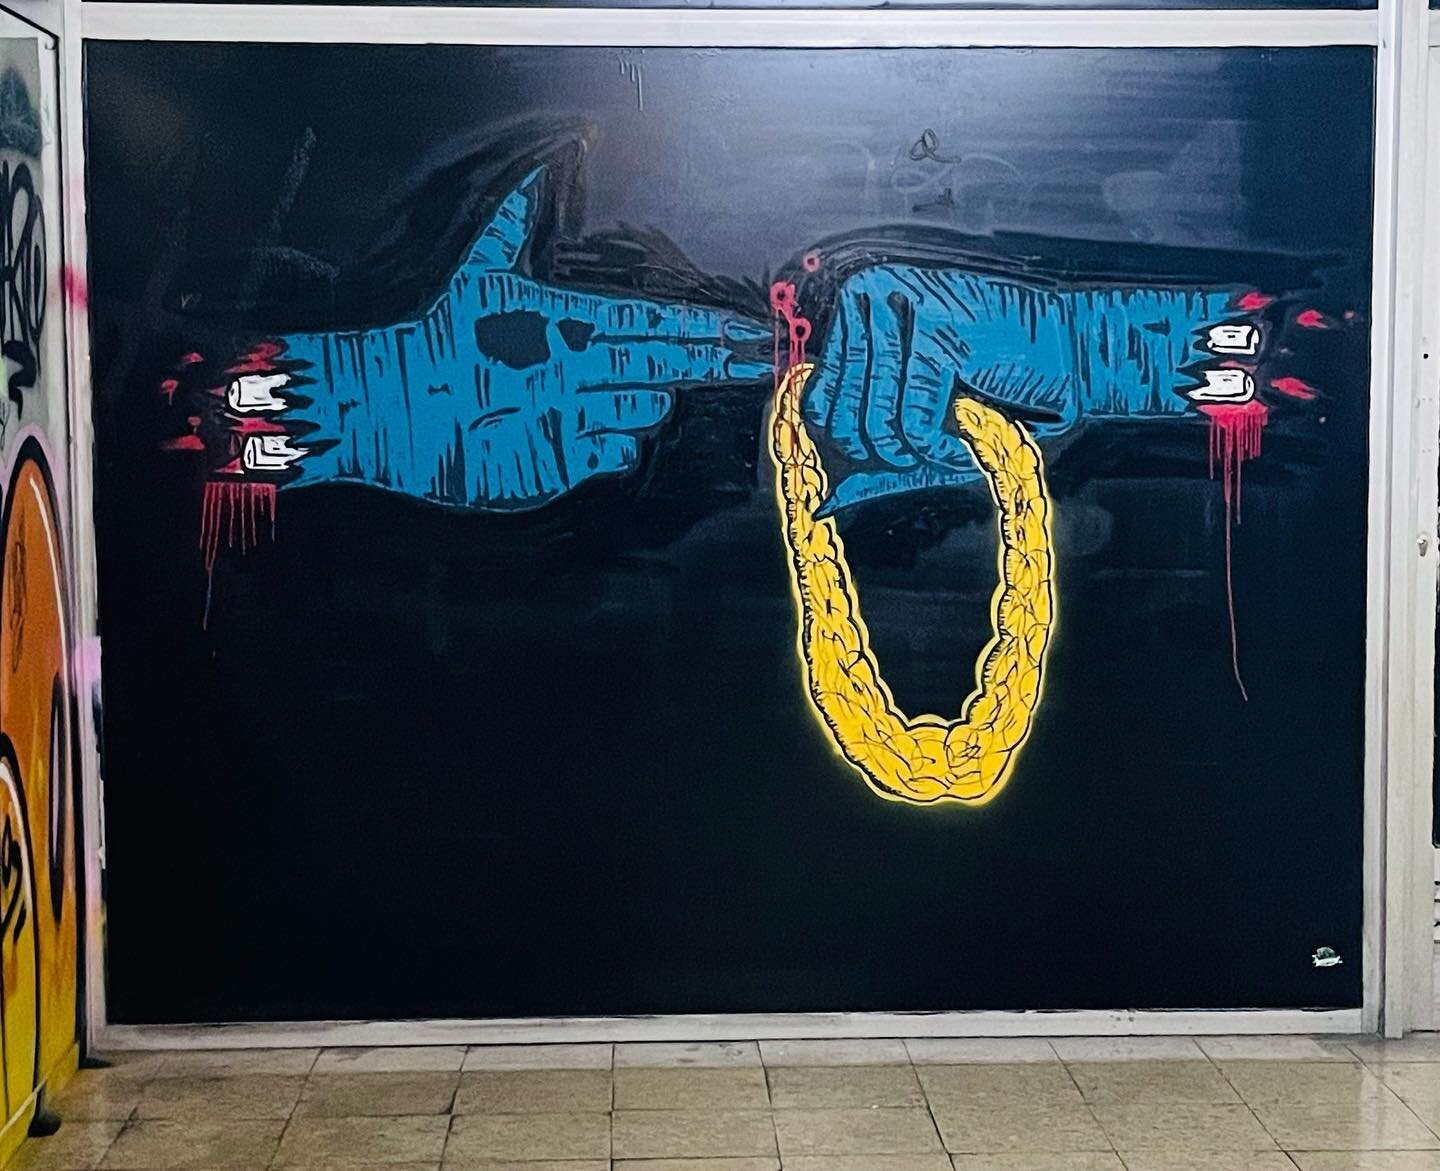 Seen in an underground music collaborative in Porto. 
&hellip;
When we say #atlantainfluenceseverything, we really mean it. #rtj #runthejewels